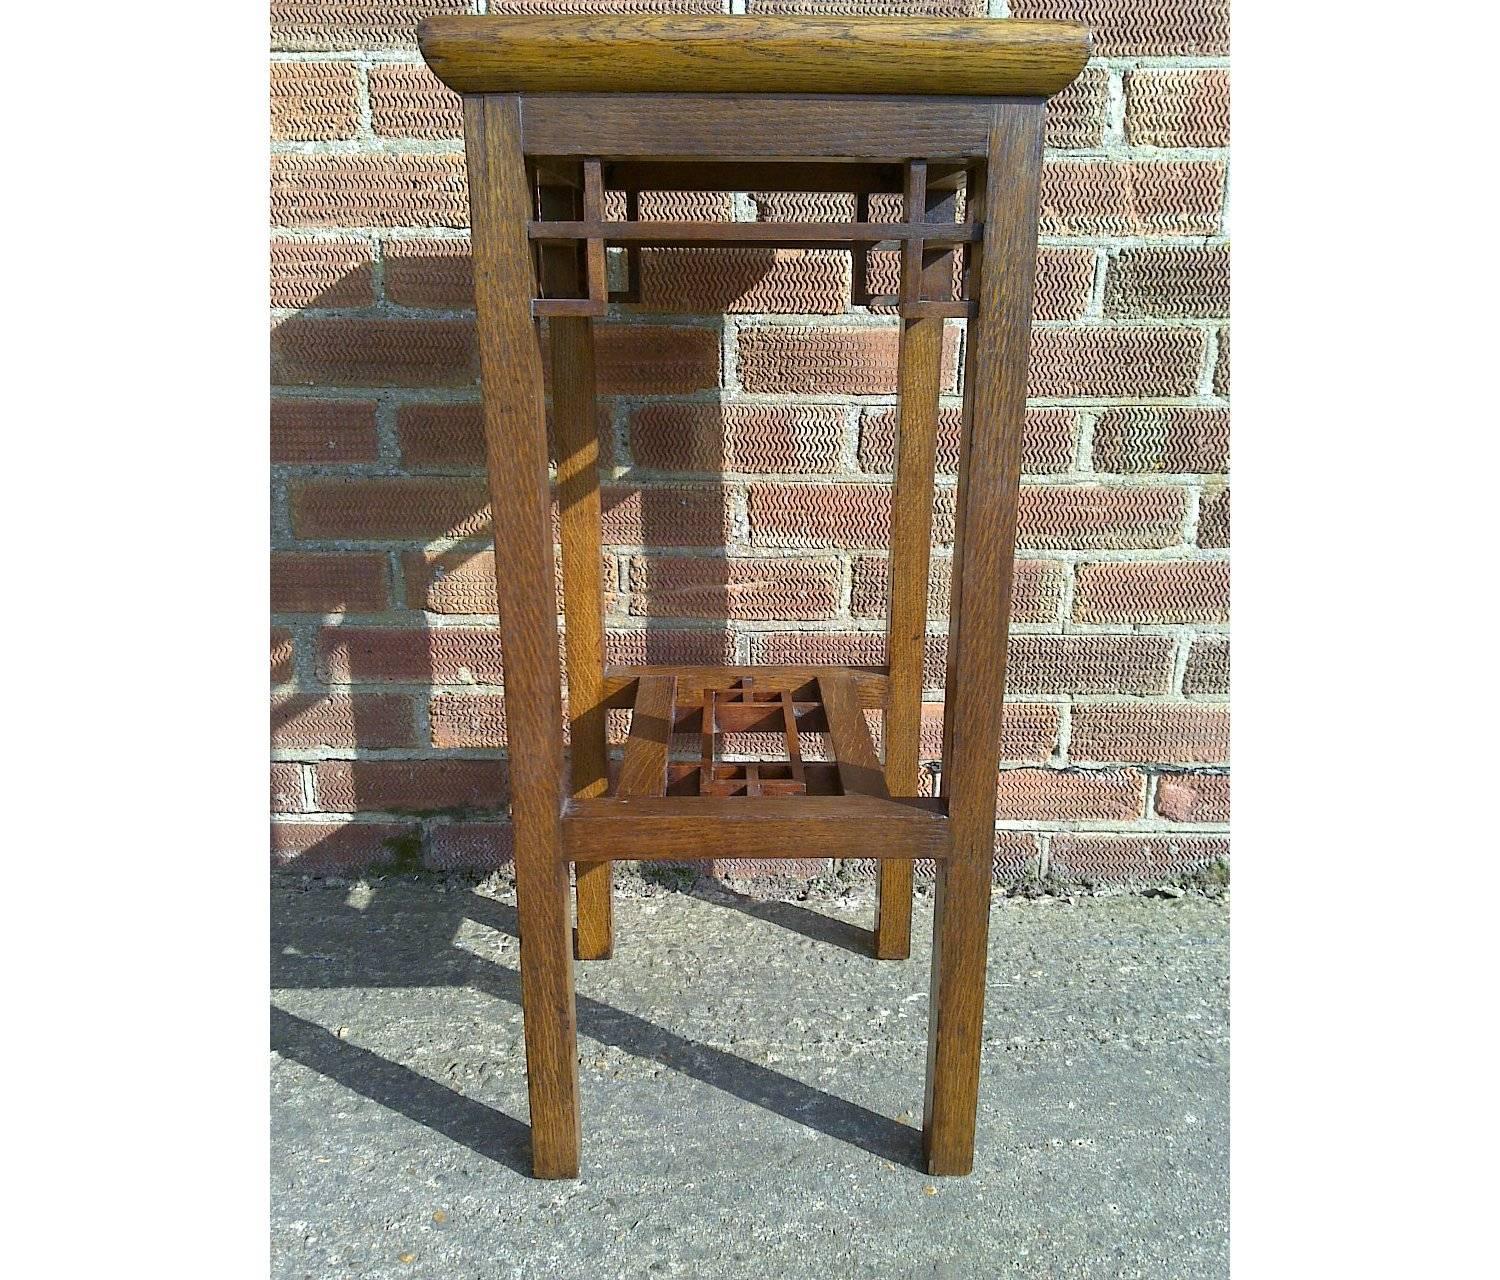  E. W. Godwin William Watt,. Probably made by William Watt.
An Anglo-Japanese oak statue or plant stand with wide inlaid top, tiny dovetail joints to the lattice work supports on square legs united by a lattice under tier. 